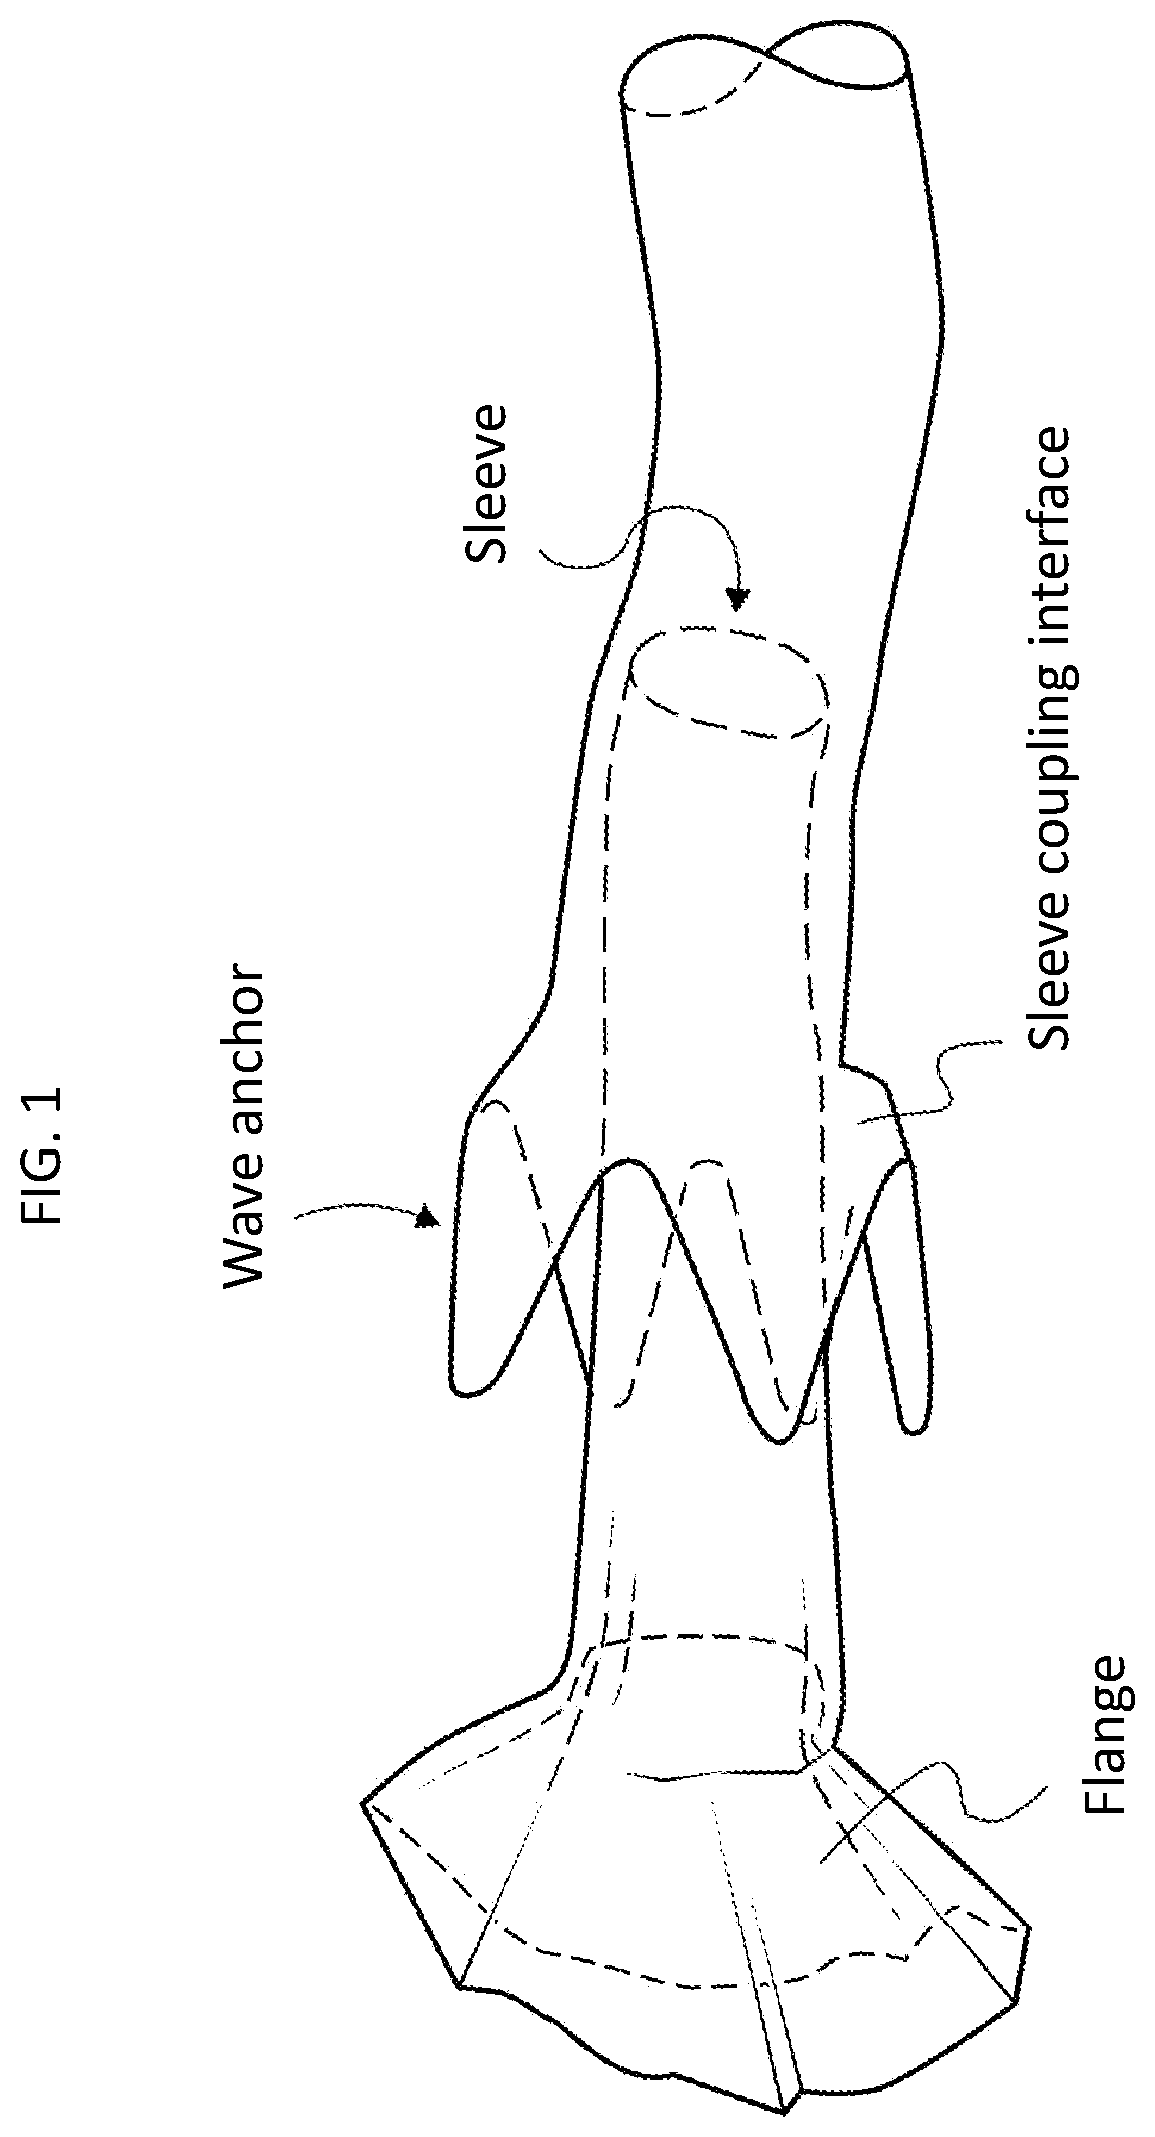 Flanged gastrointestinal devices and methods of use thereof